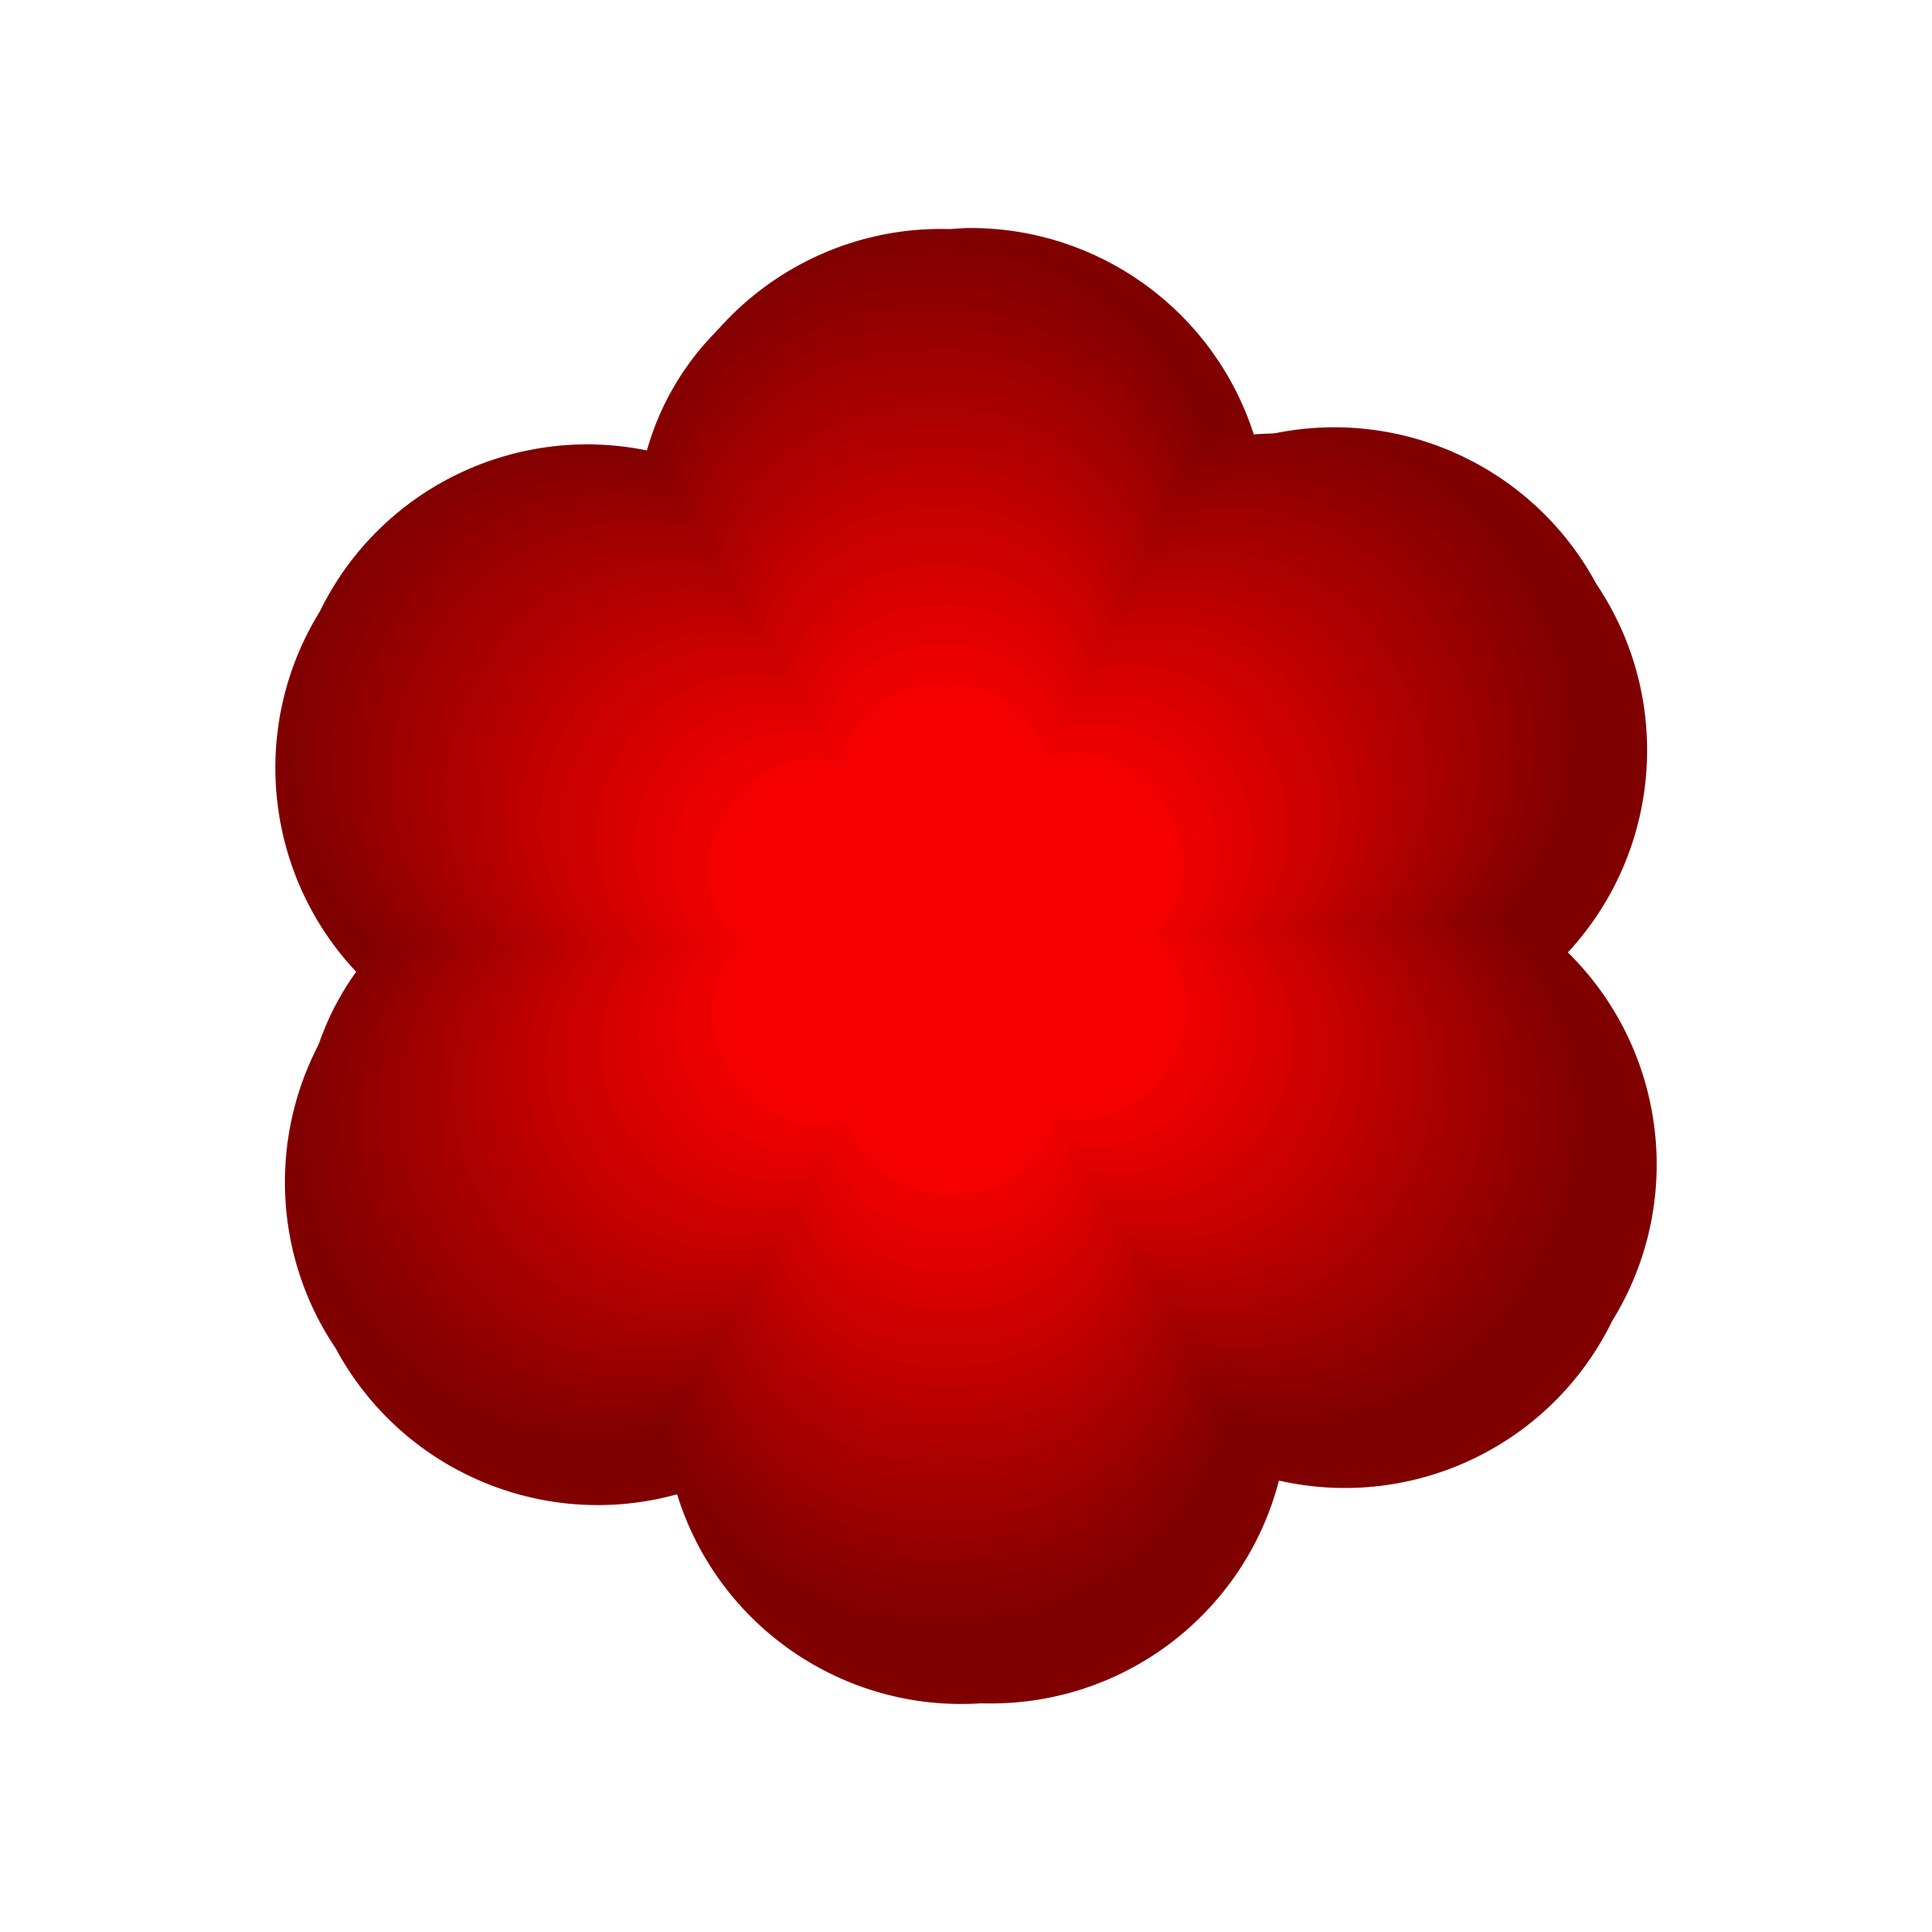 Flower clipart red. Big image png